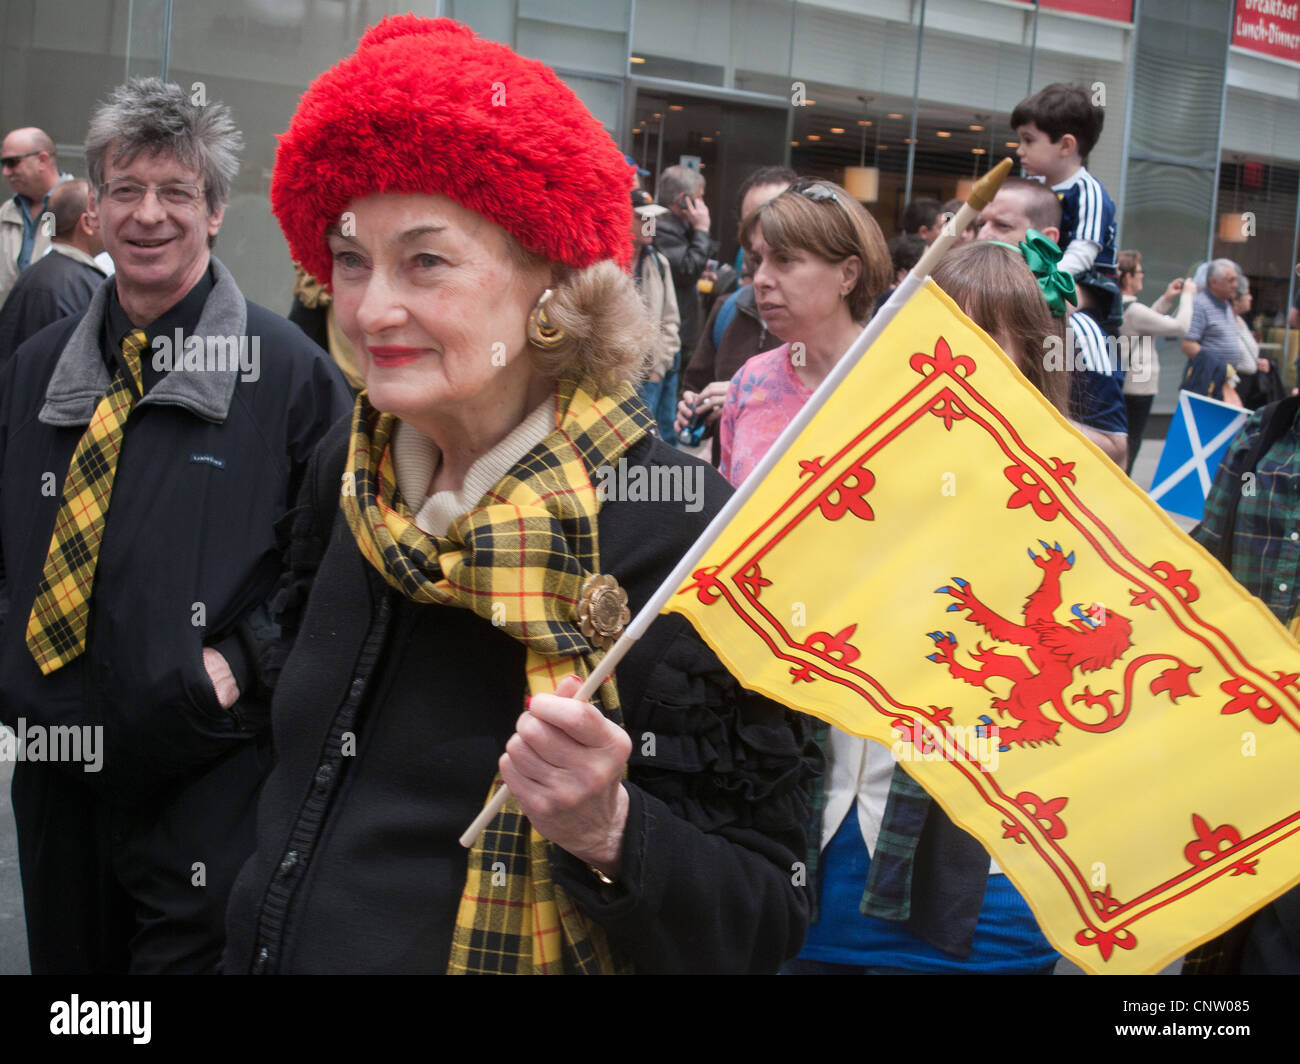 Scottish bagpipers, dancers, and onlookers enjoy the annual Tartan Day Parade on 6th Ave. in New York City Stock Photo